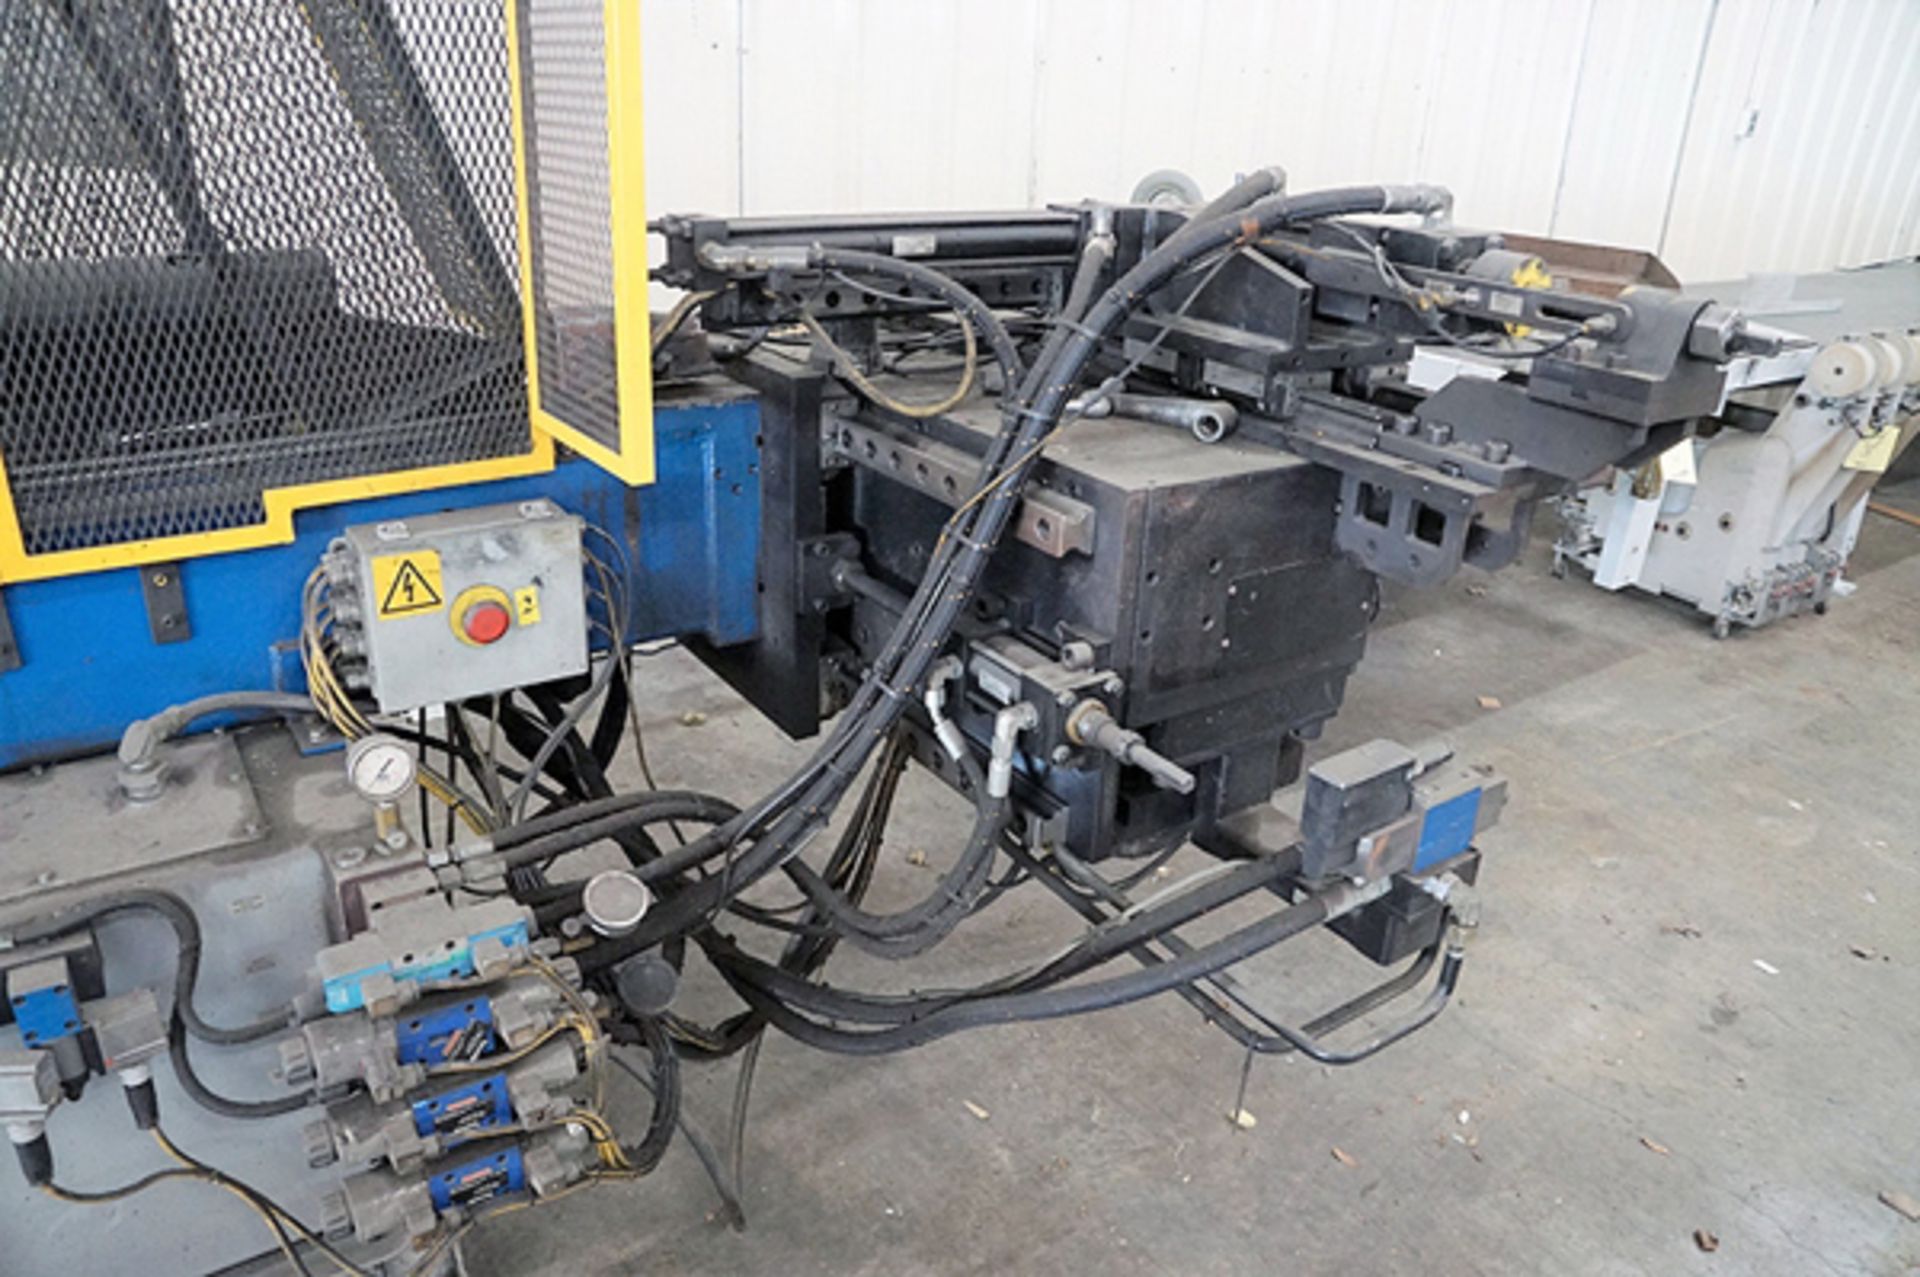 Eaton Leonard CNC Hydraulic Tube & Pipe Bender 2'' x 174''. LOADING FEE FOR THIS LOT: $750 - Image 5 of 11